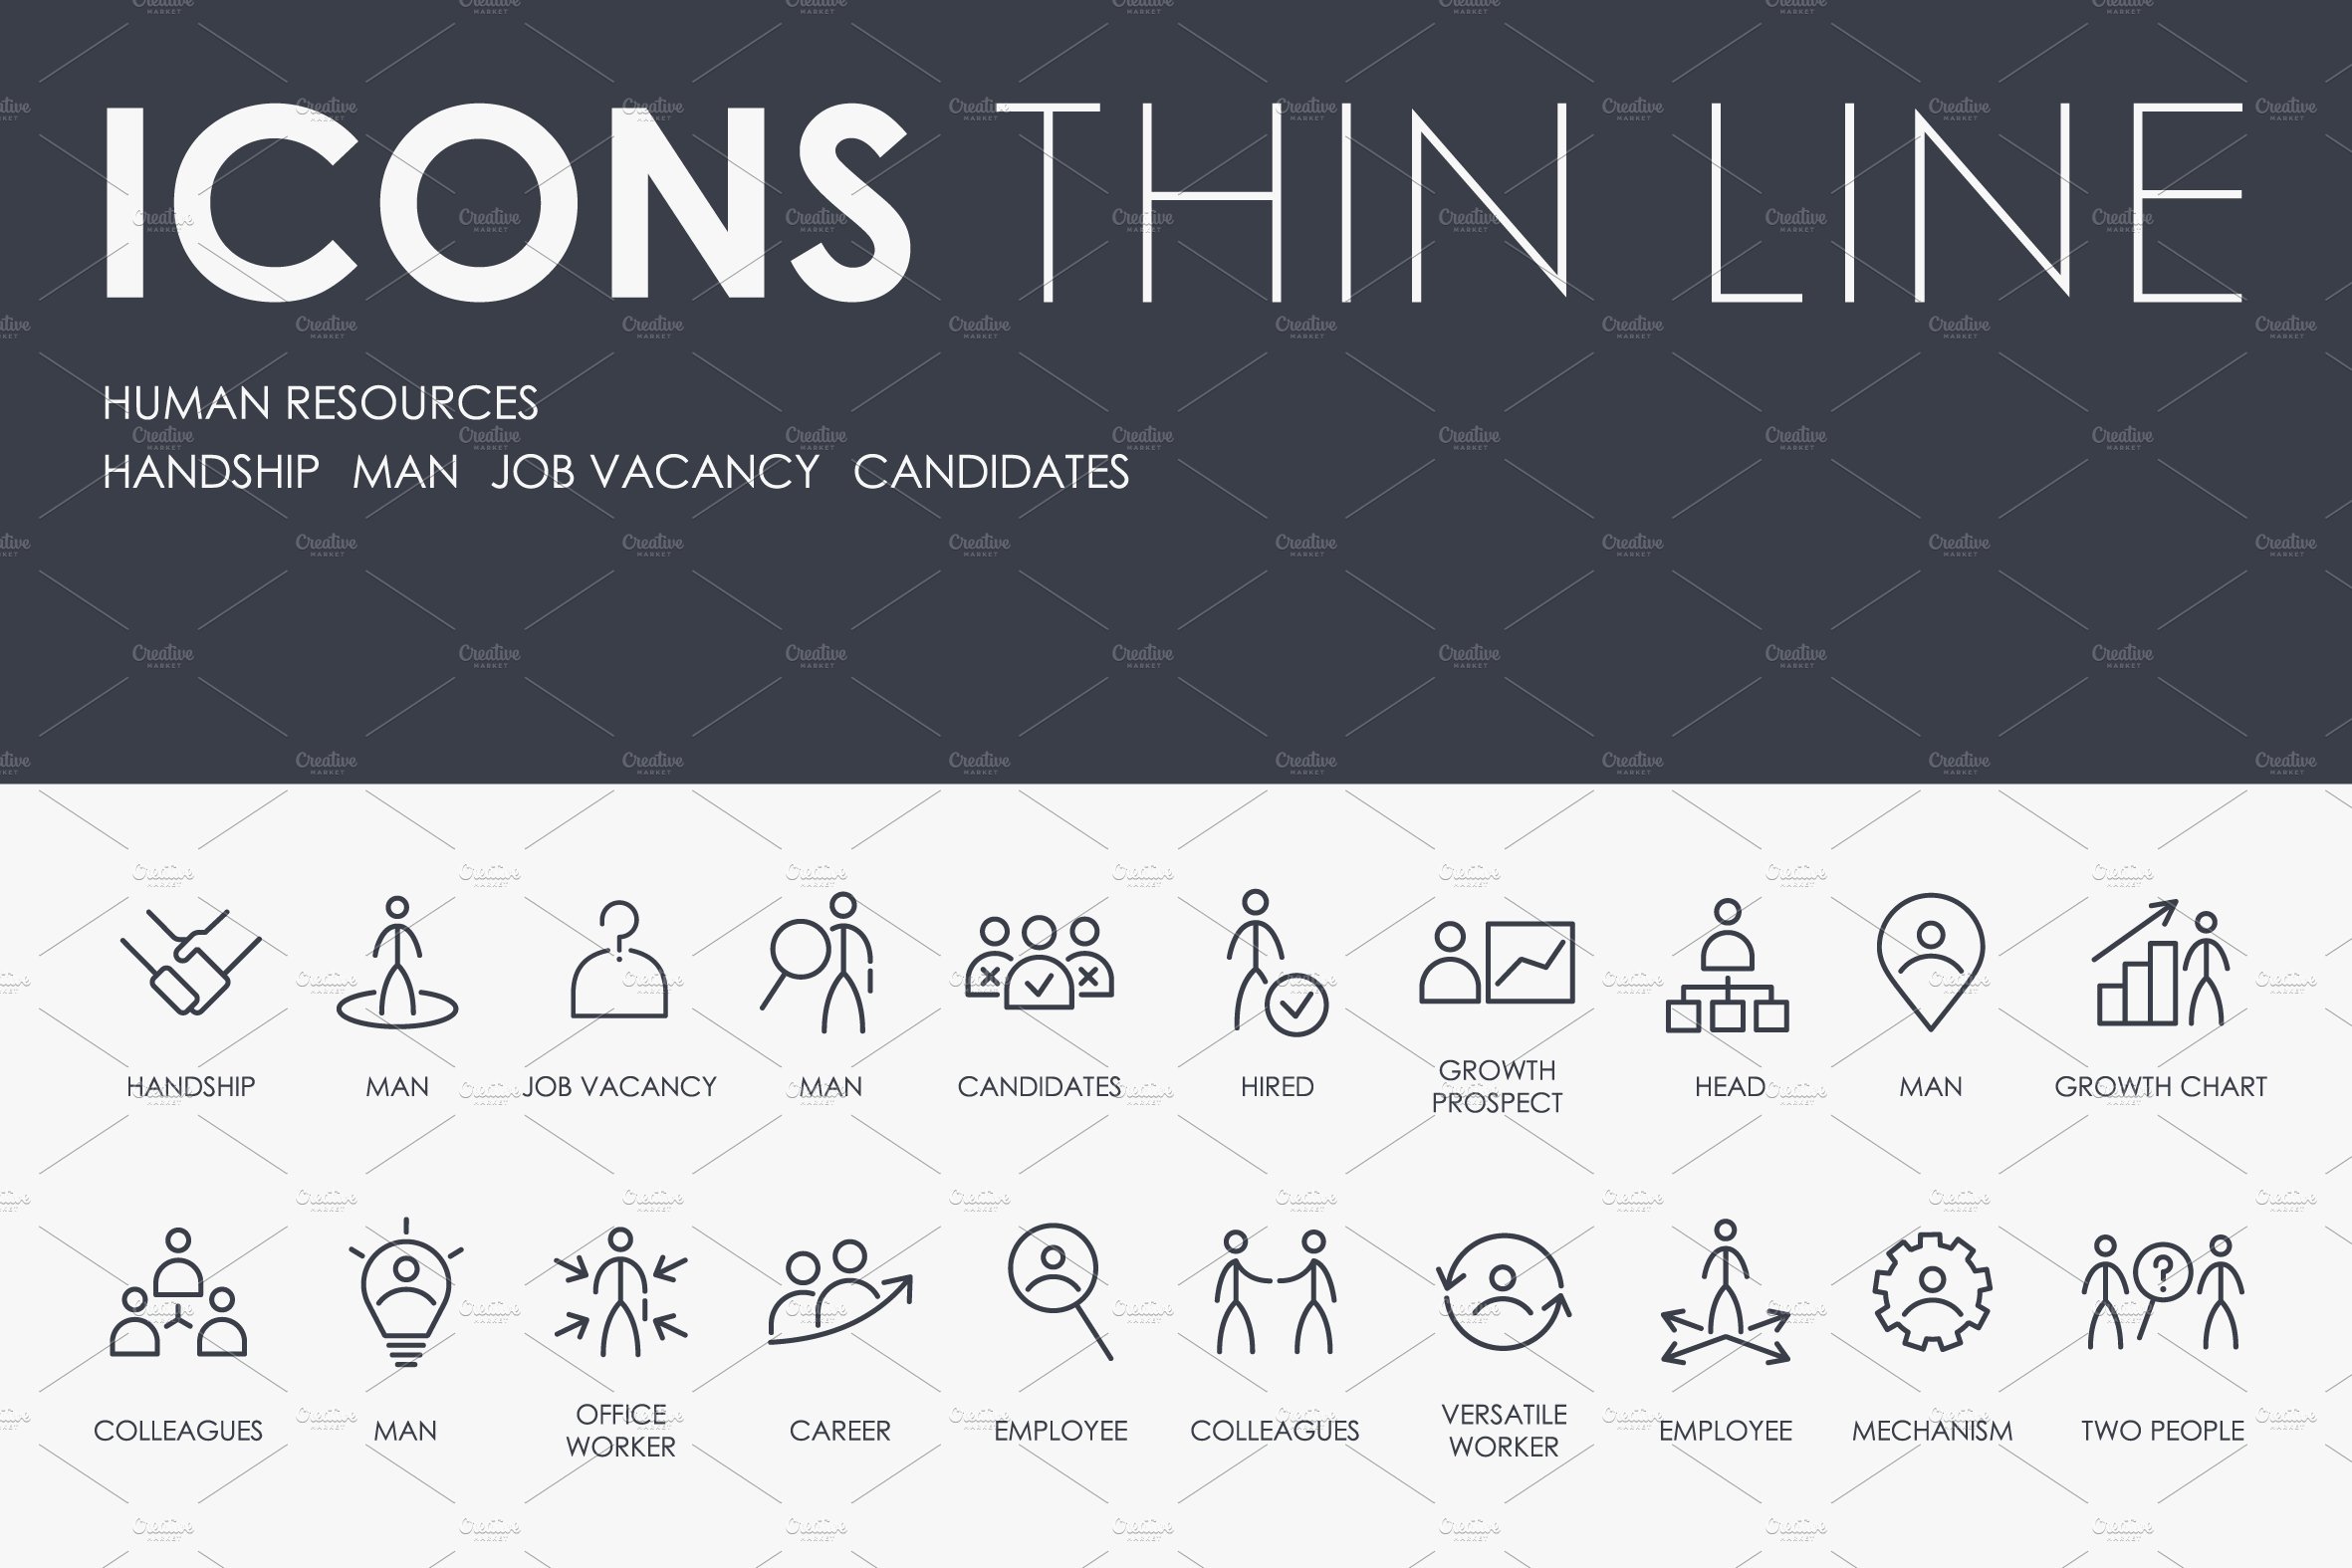 Human resources thinline icons cover image.